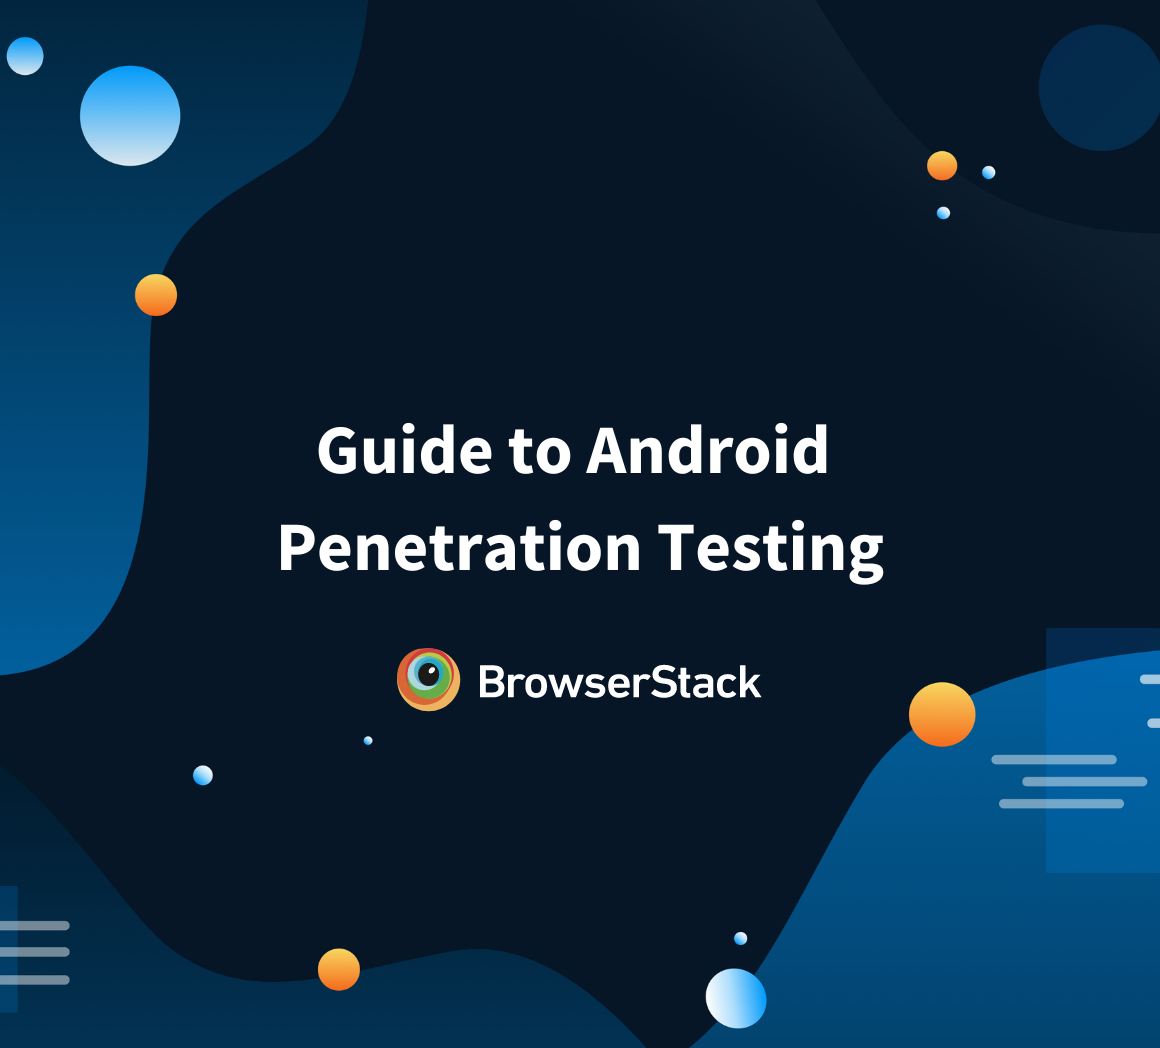 Guide to Android Penetration Testing